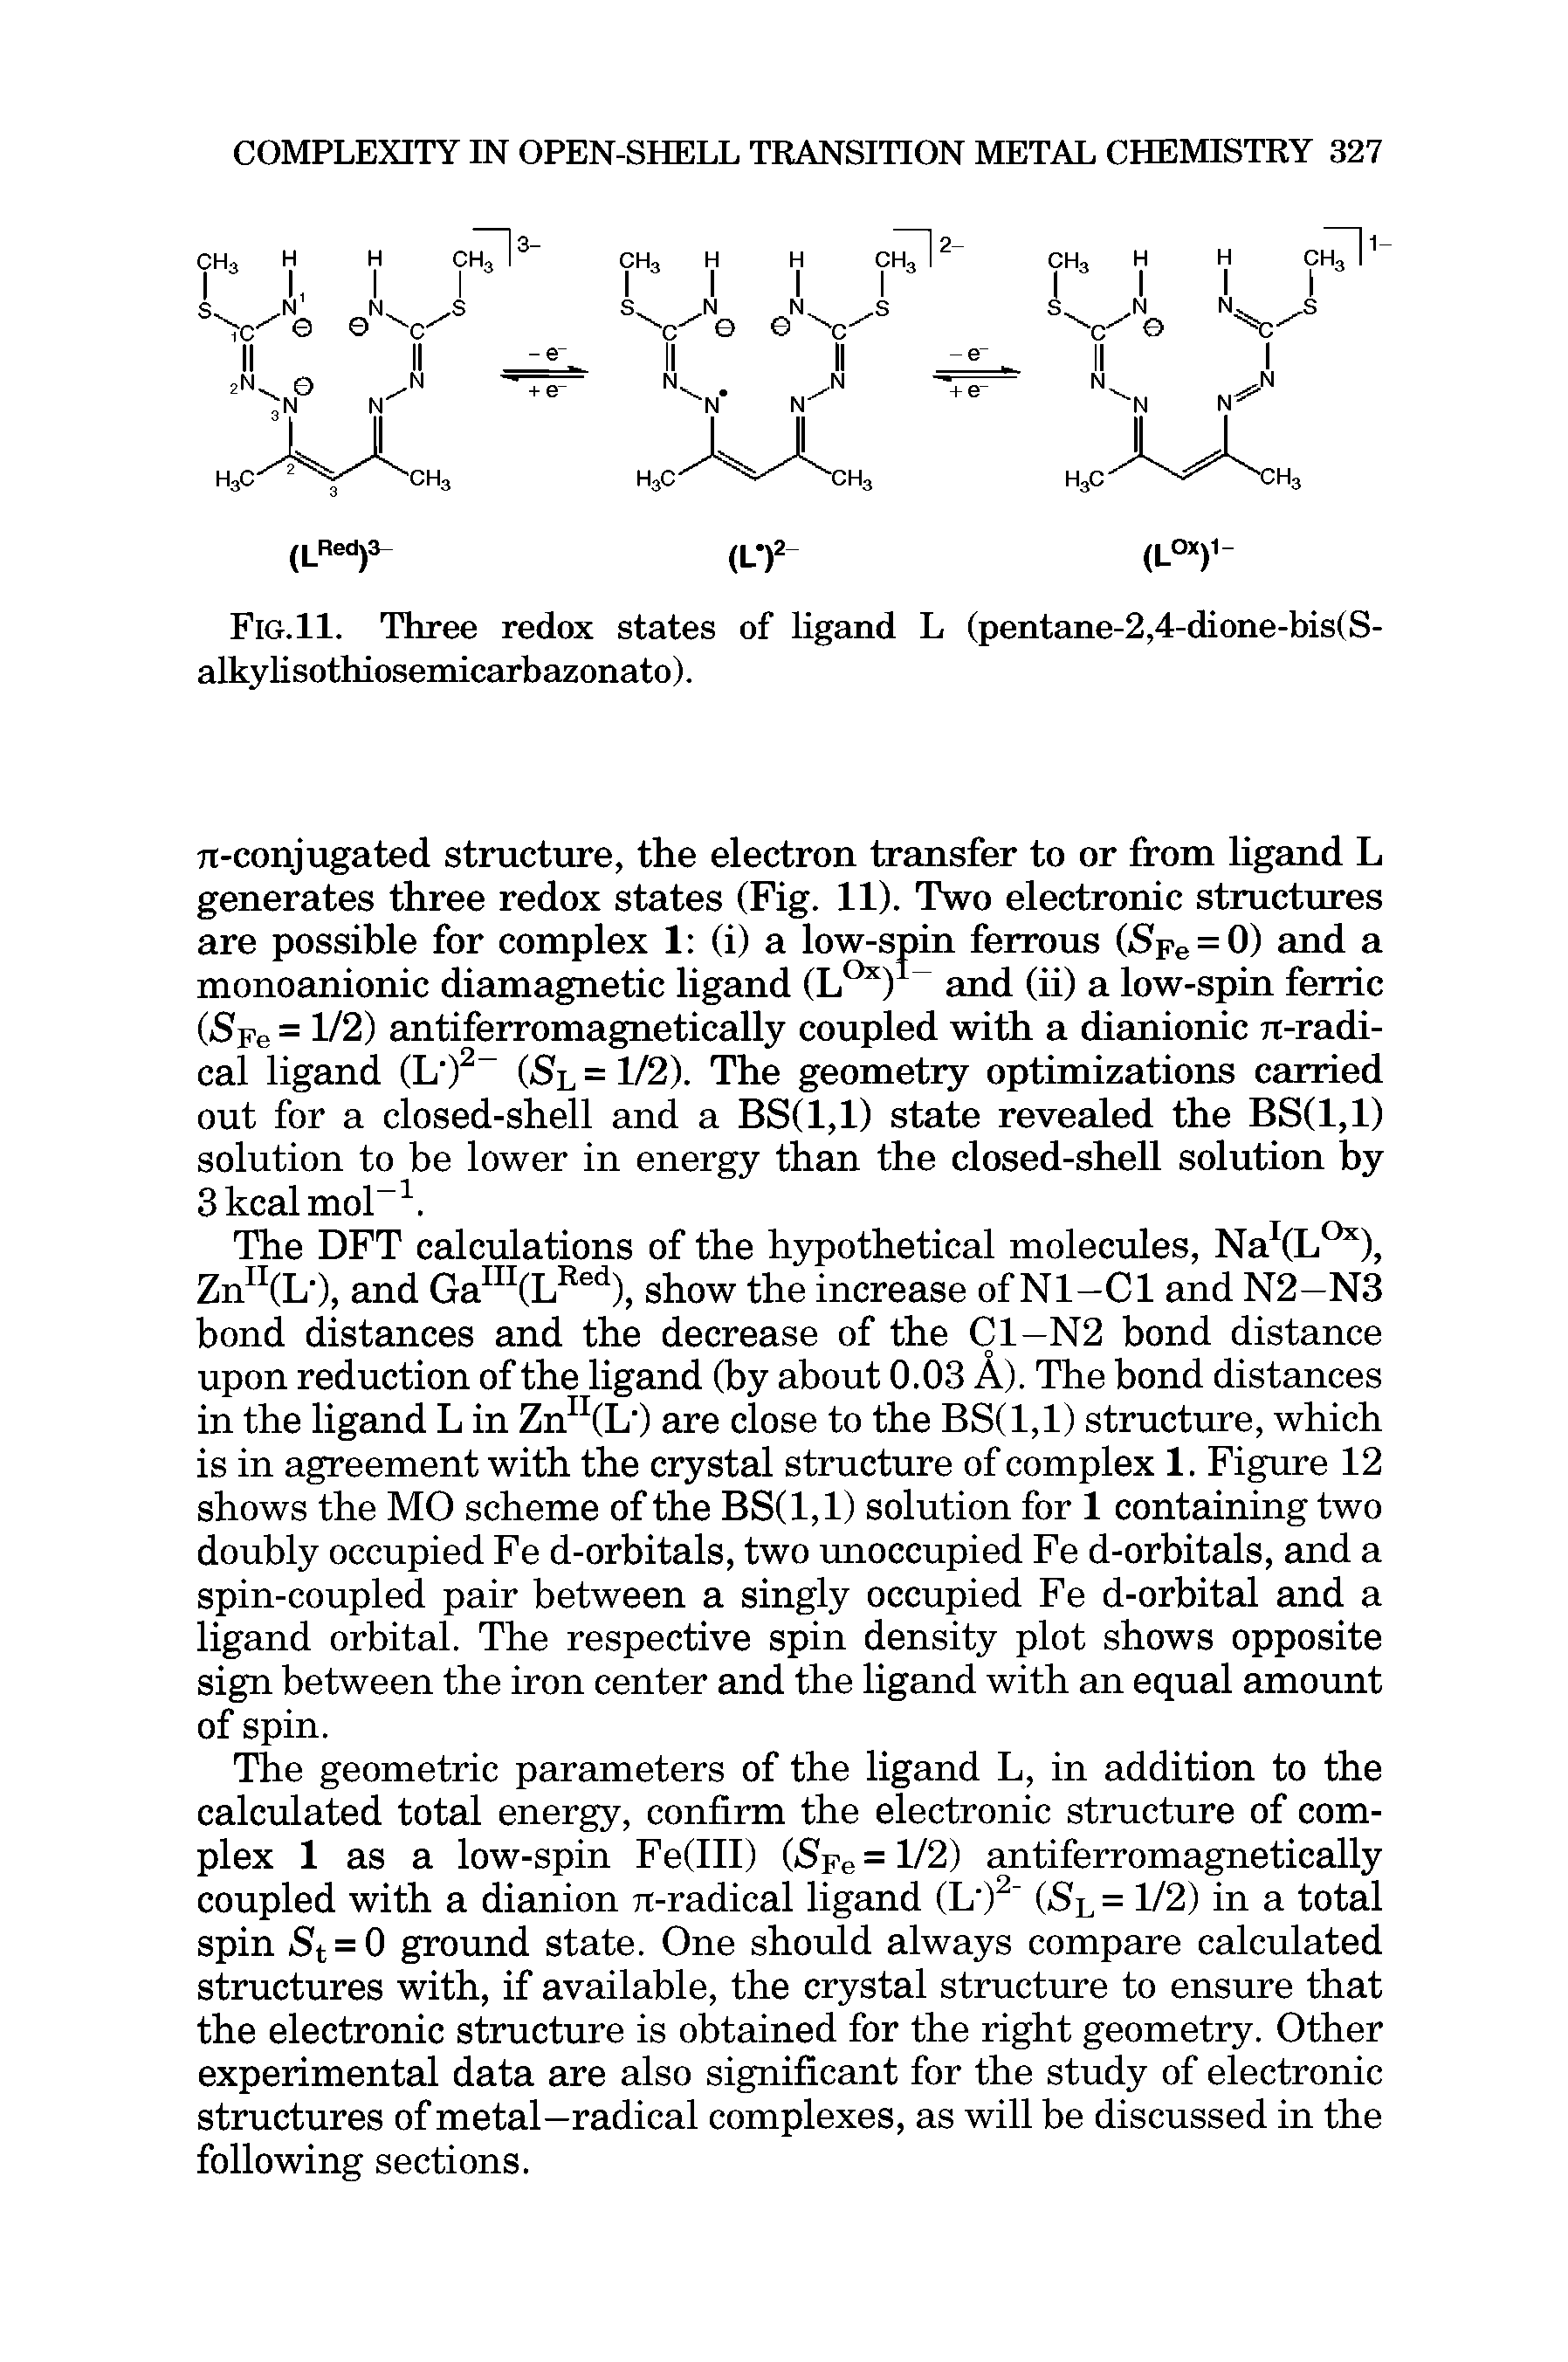 Fig.11. Three redox states of ligand L (pentane-2,4-dione-bis(S-alkylisothiosemicarbazonato).